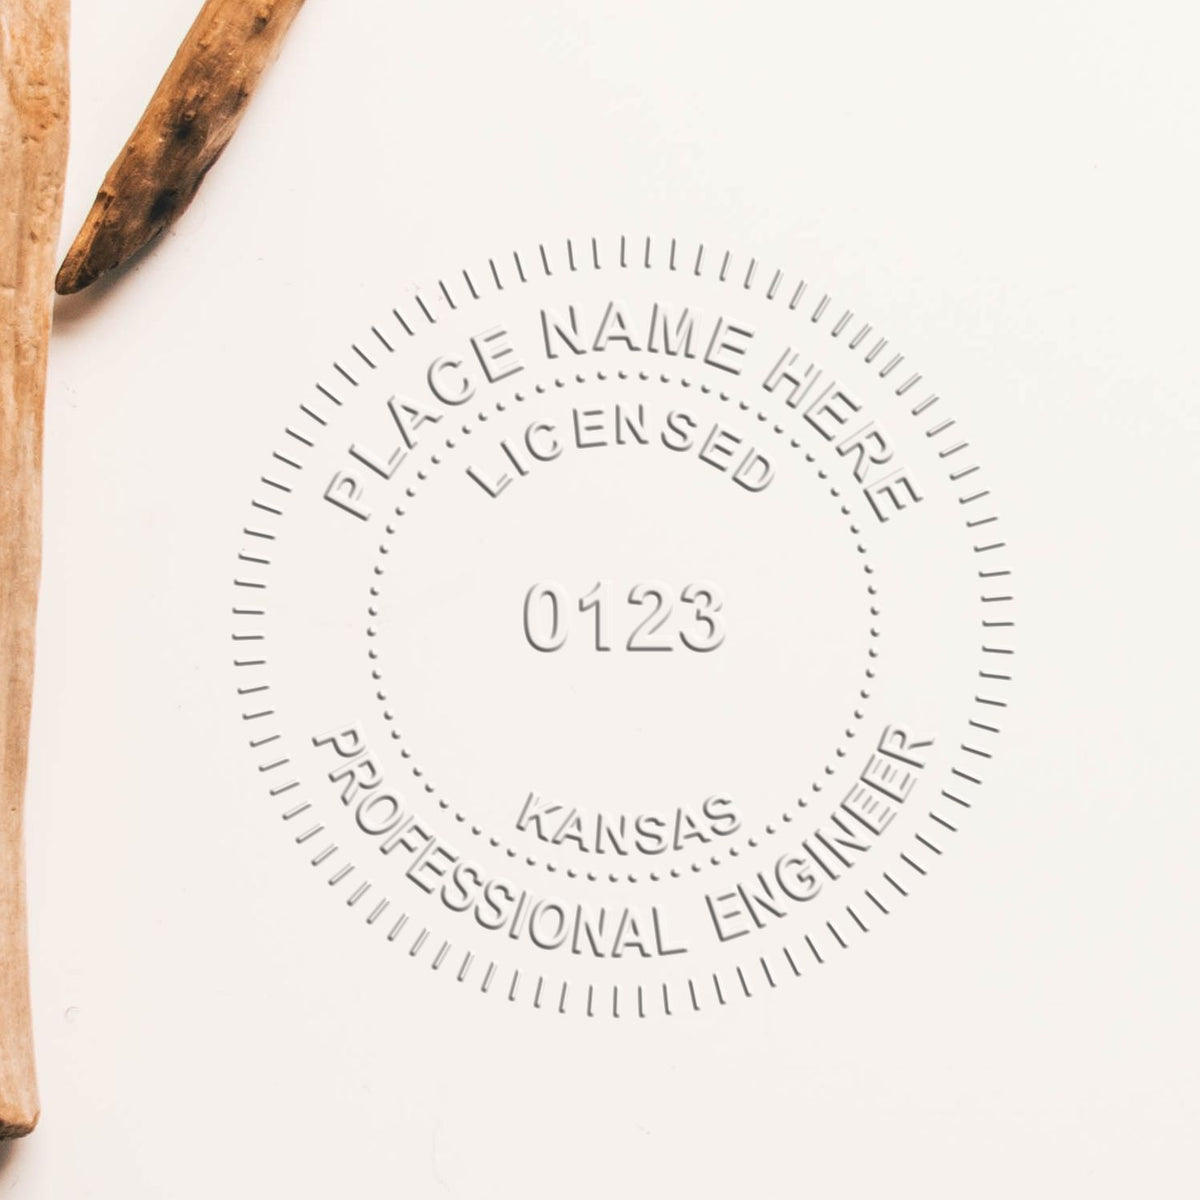 The Gift Kansas Engineer Seal stamp impression comes to life with a crisp, detailed image stamped on paper - showcasing true professional quality.